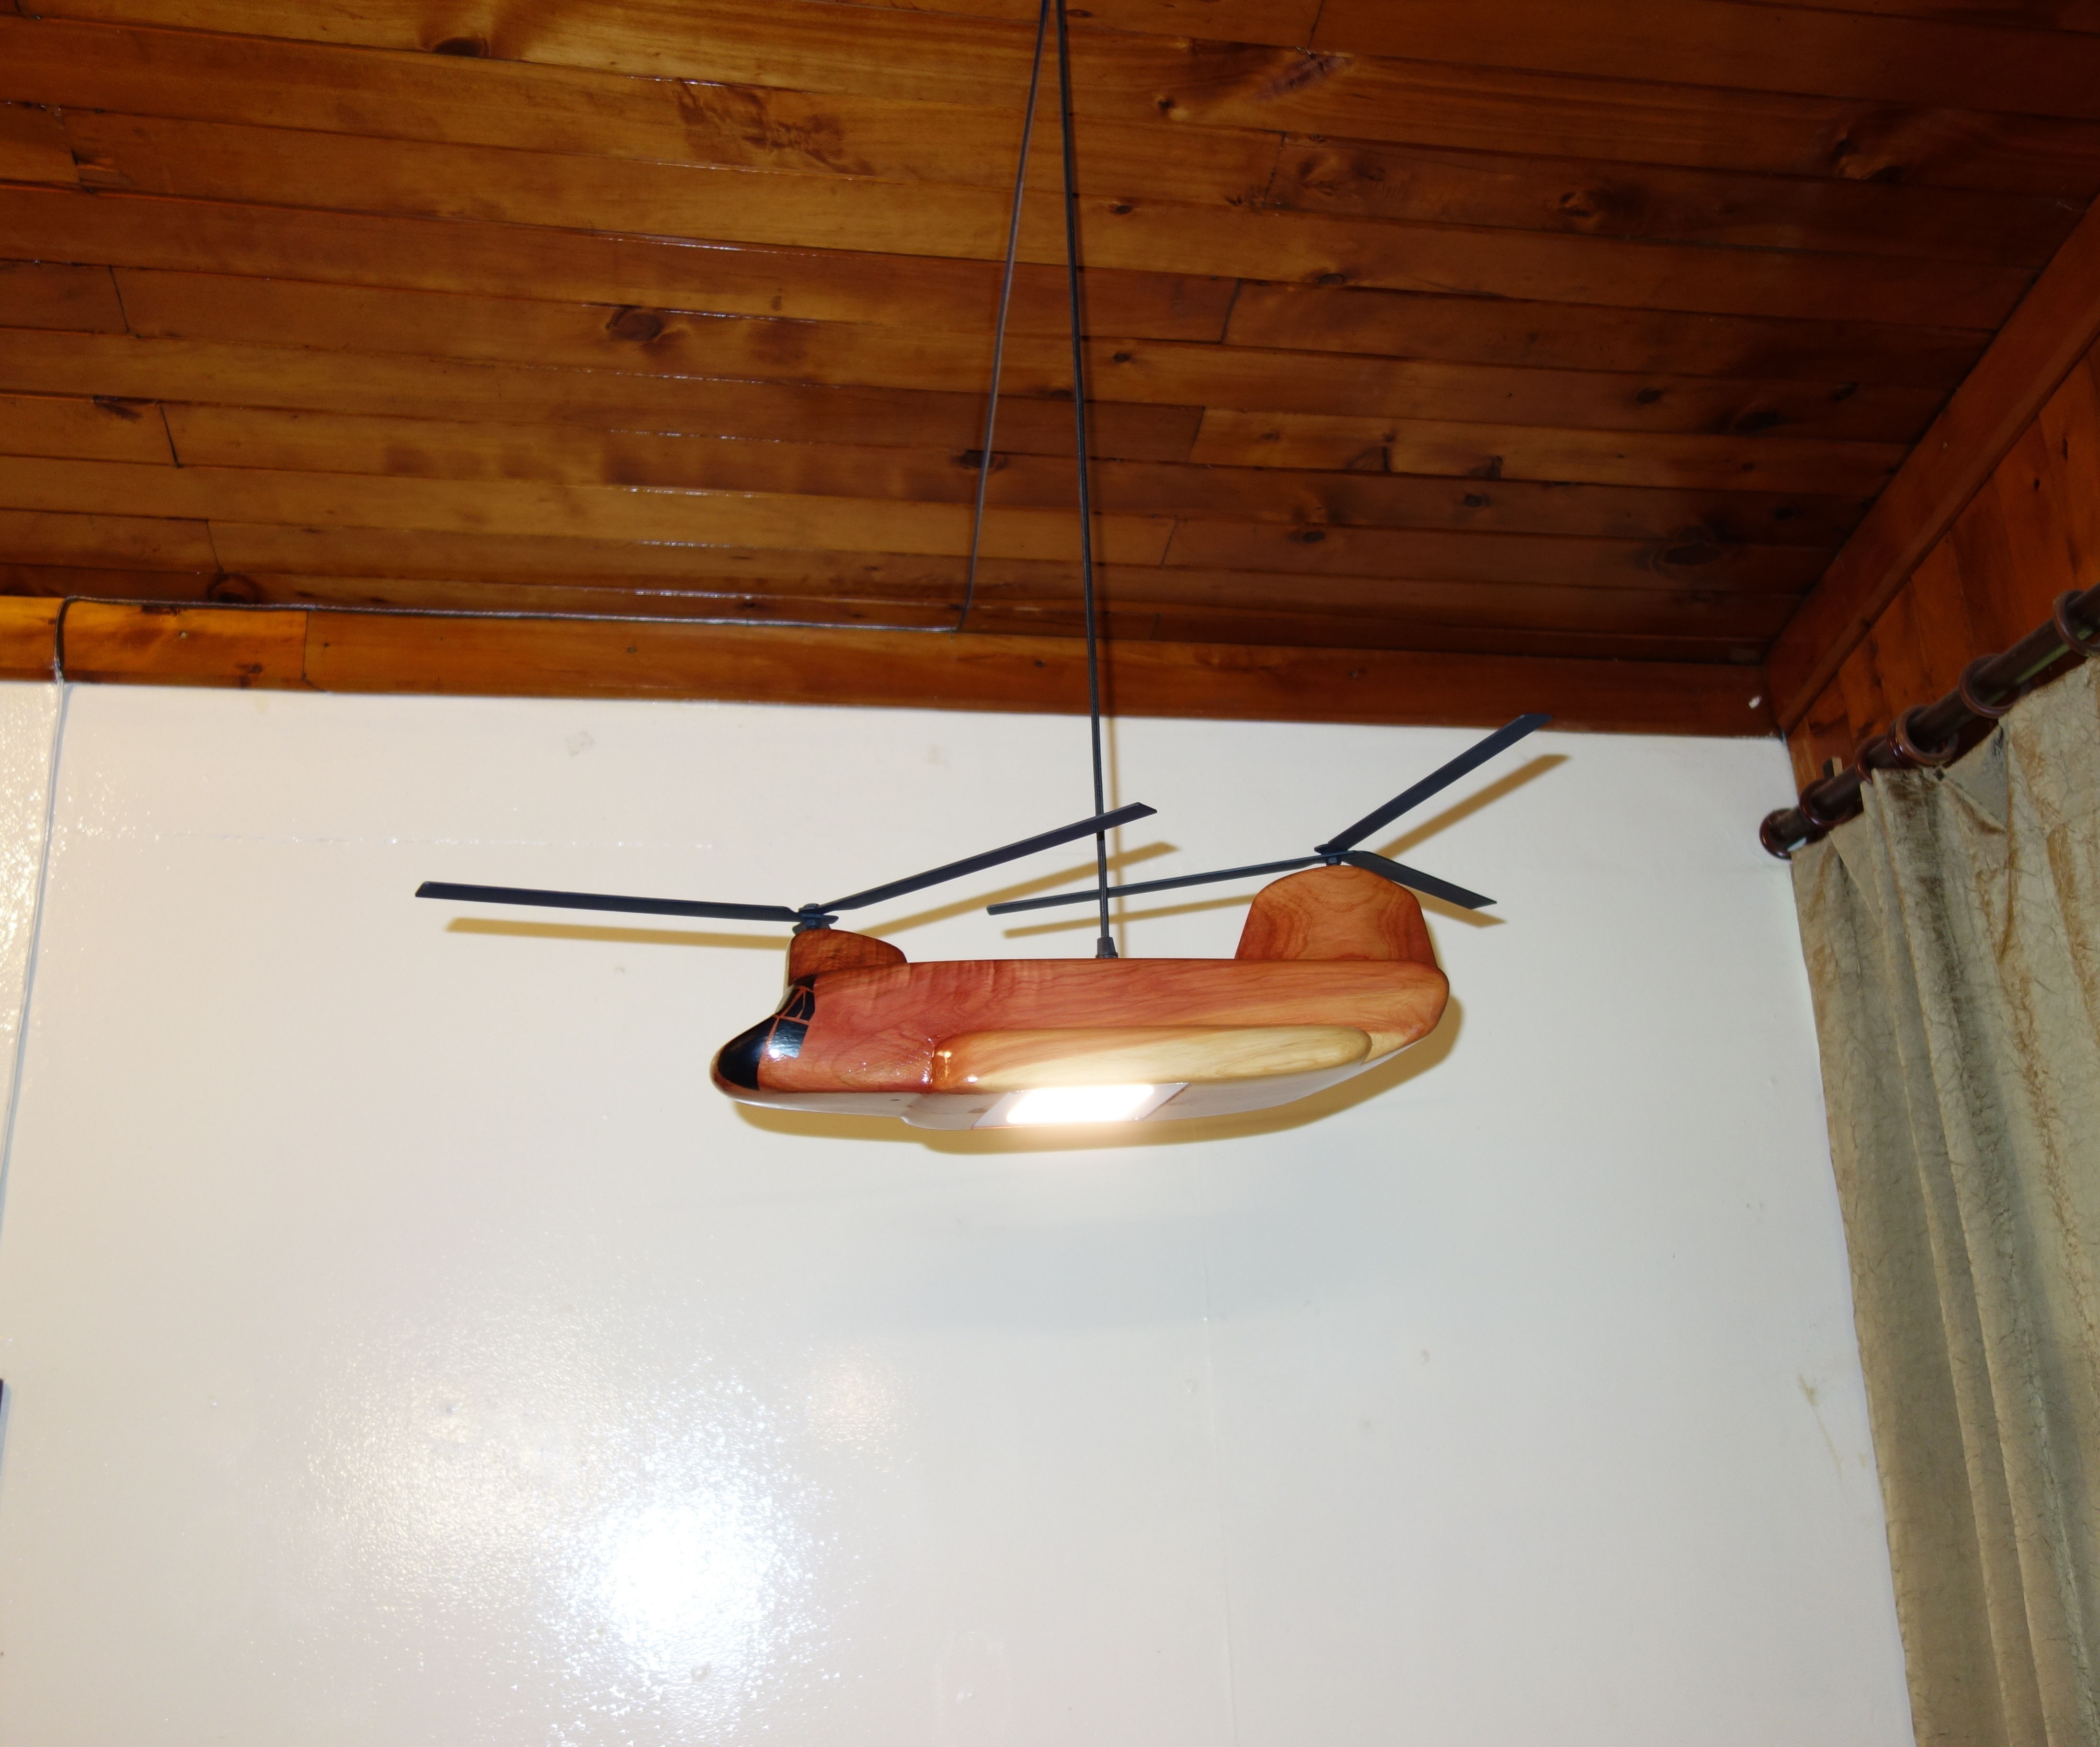 Helicopter Hanging Light Made With a CNC Machine and Fusion 360